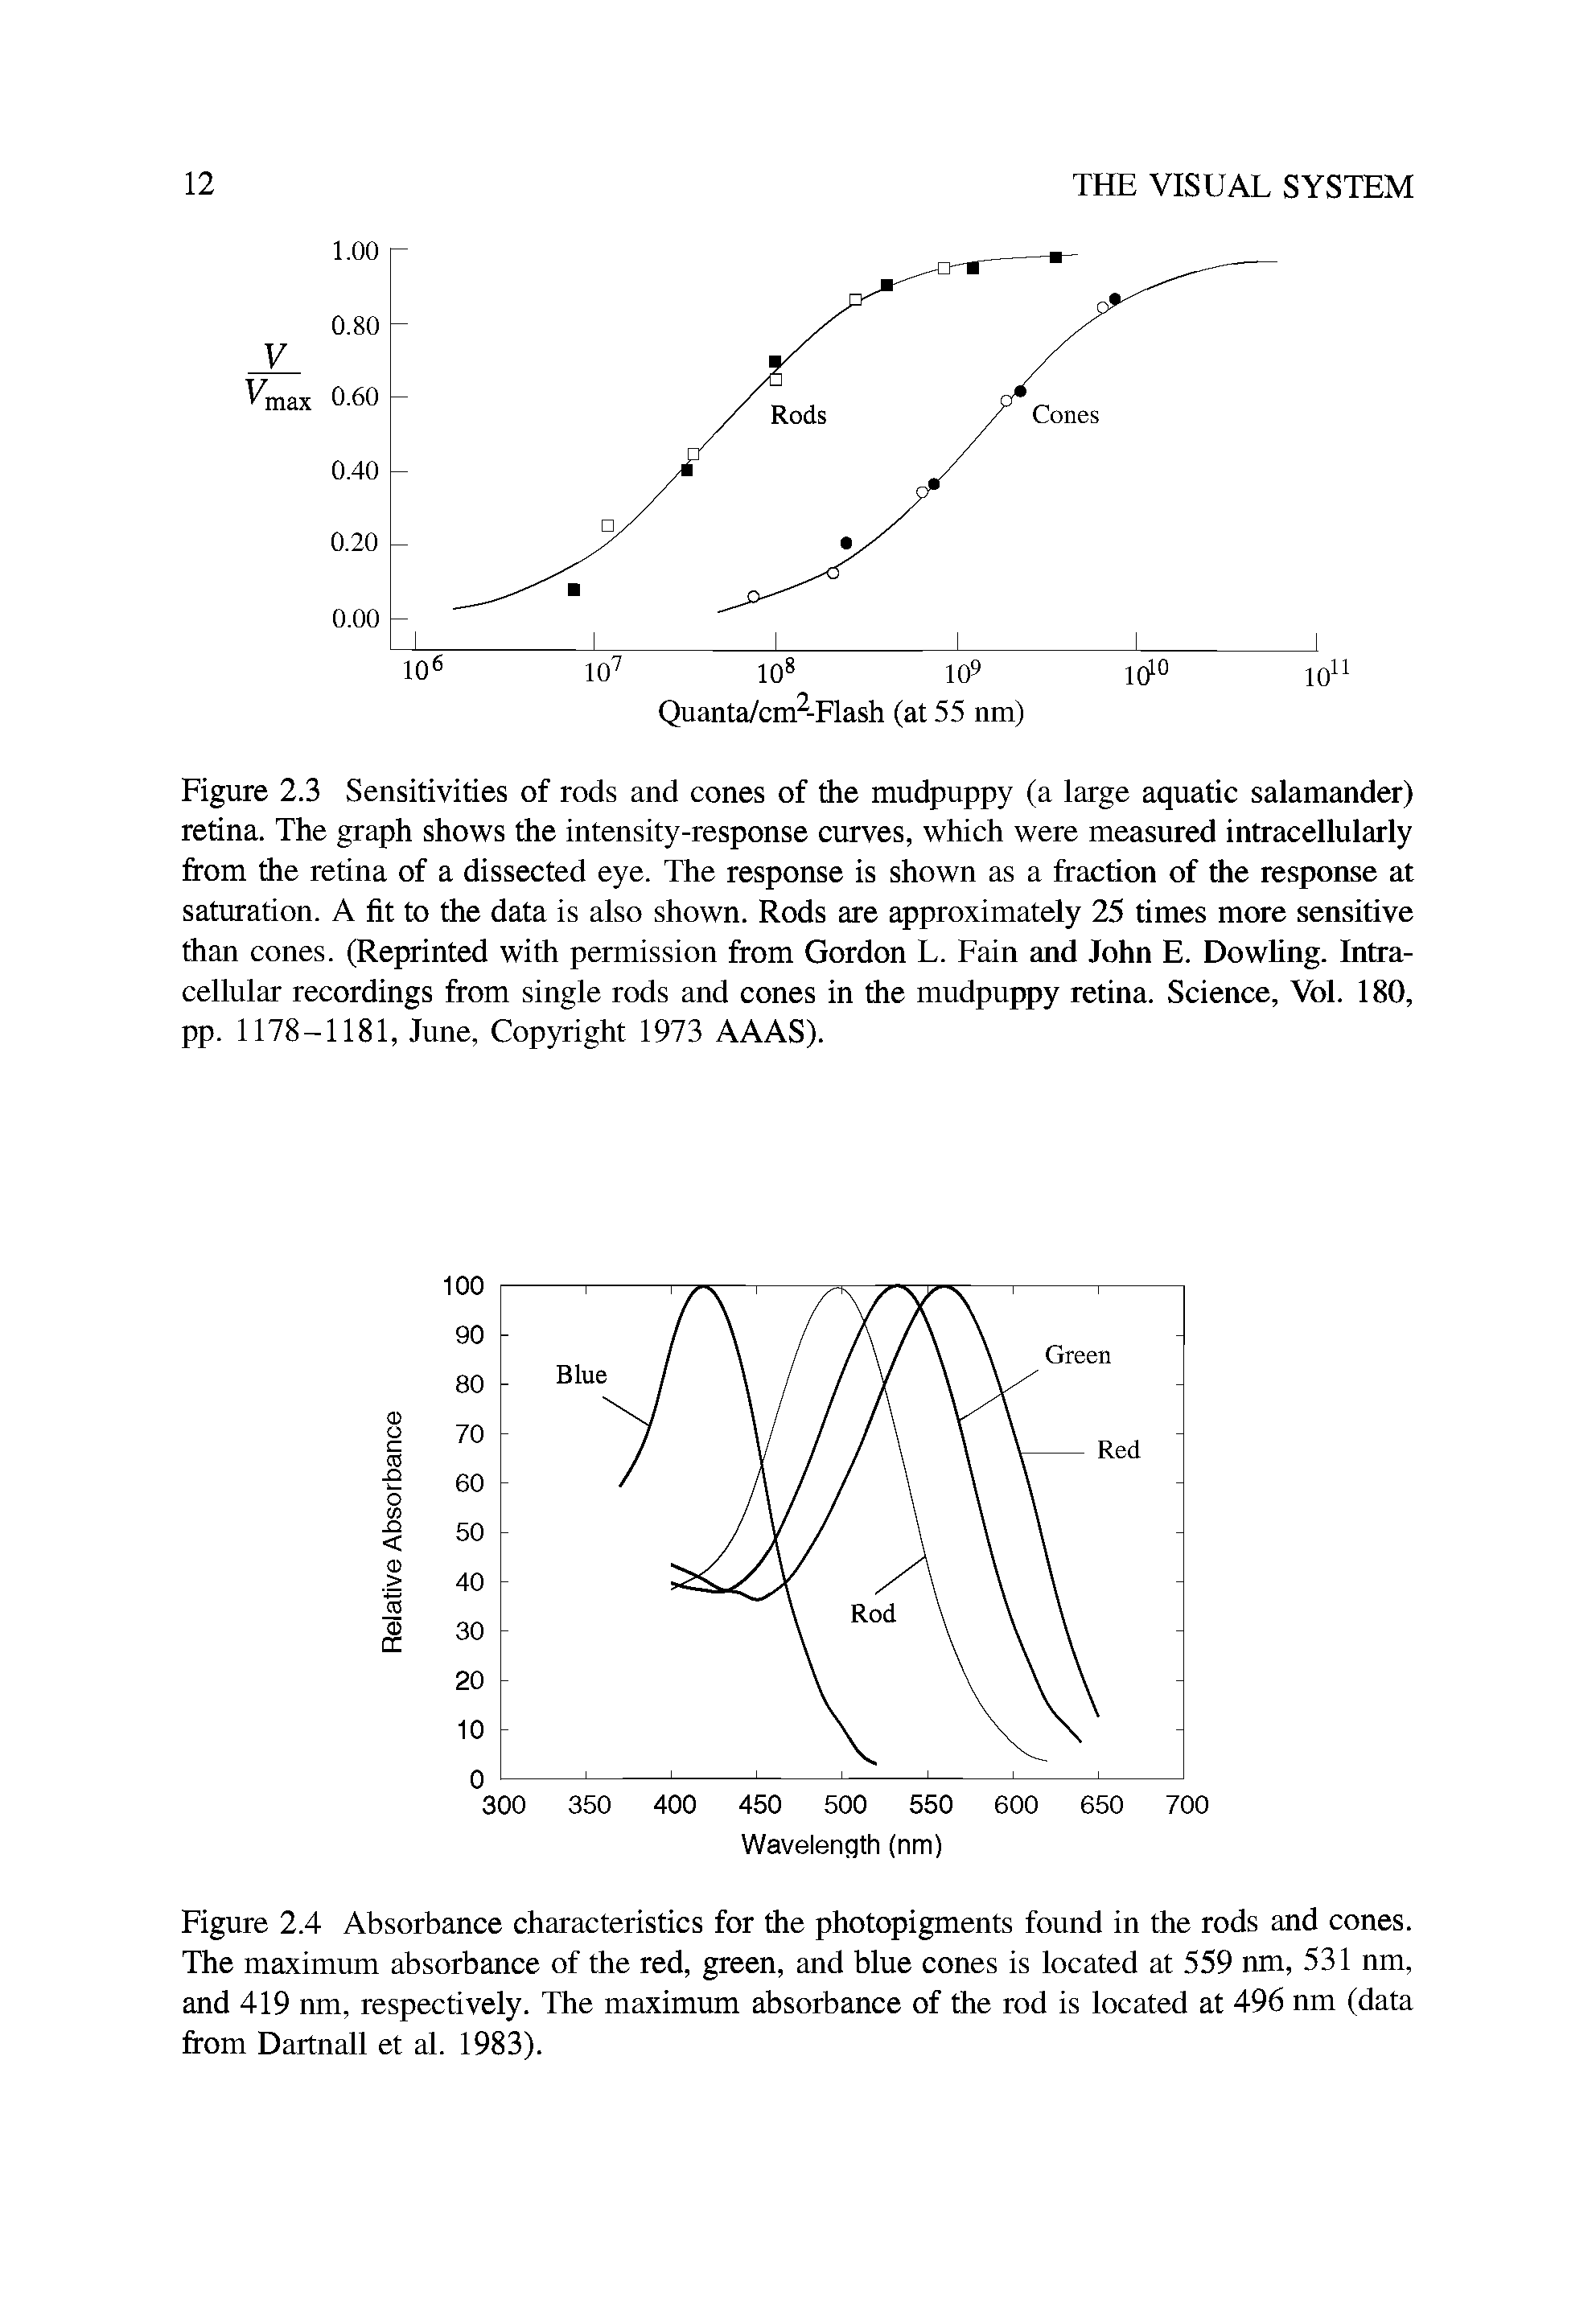 Figure 2.4 Absorbance characteristics for the photopigments found in the rods and cones. The maximum absorbance of the red, green, and blue cones is located at 559 nm, 531 nm, and 419 nm, respectively. The maximum absorbance of the rod is located at 496 nm (data from Dartnall et al. 1983).